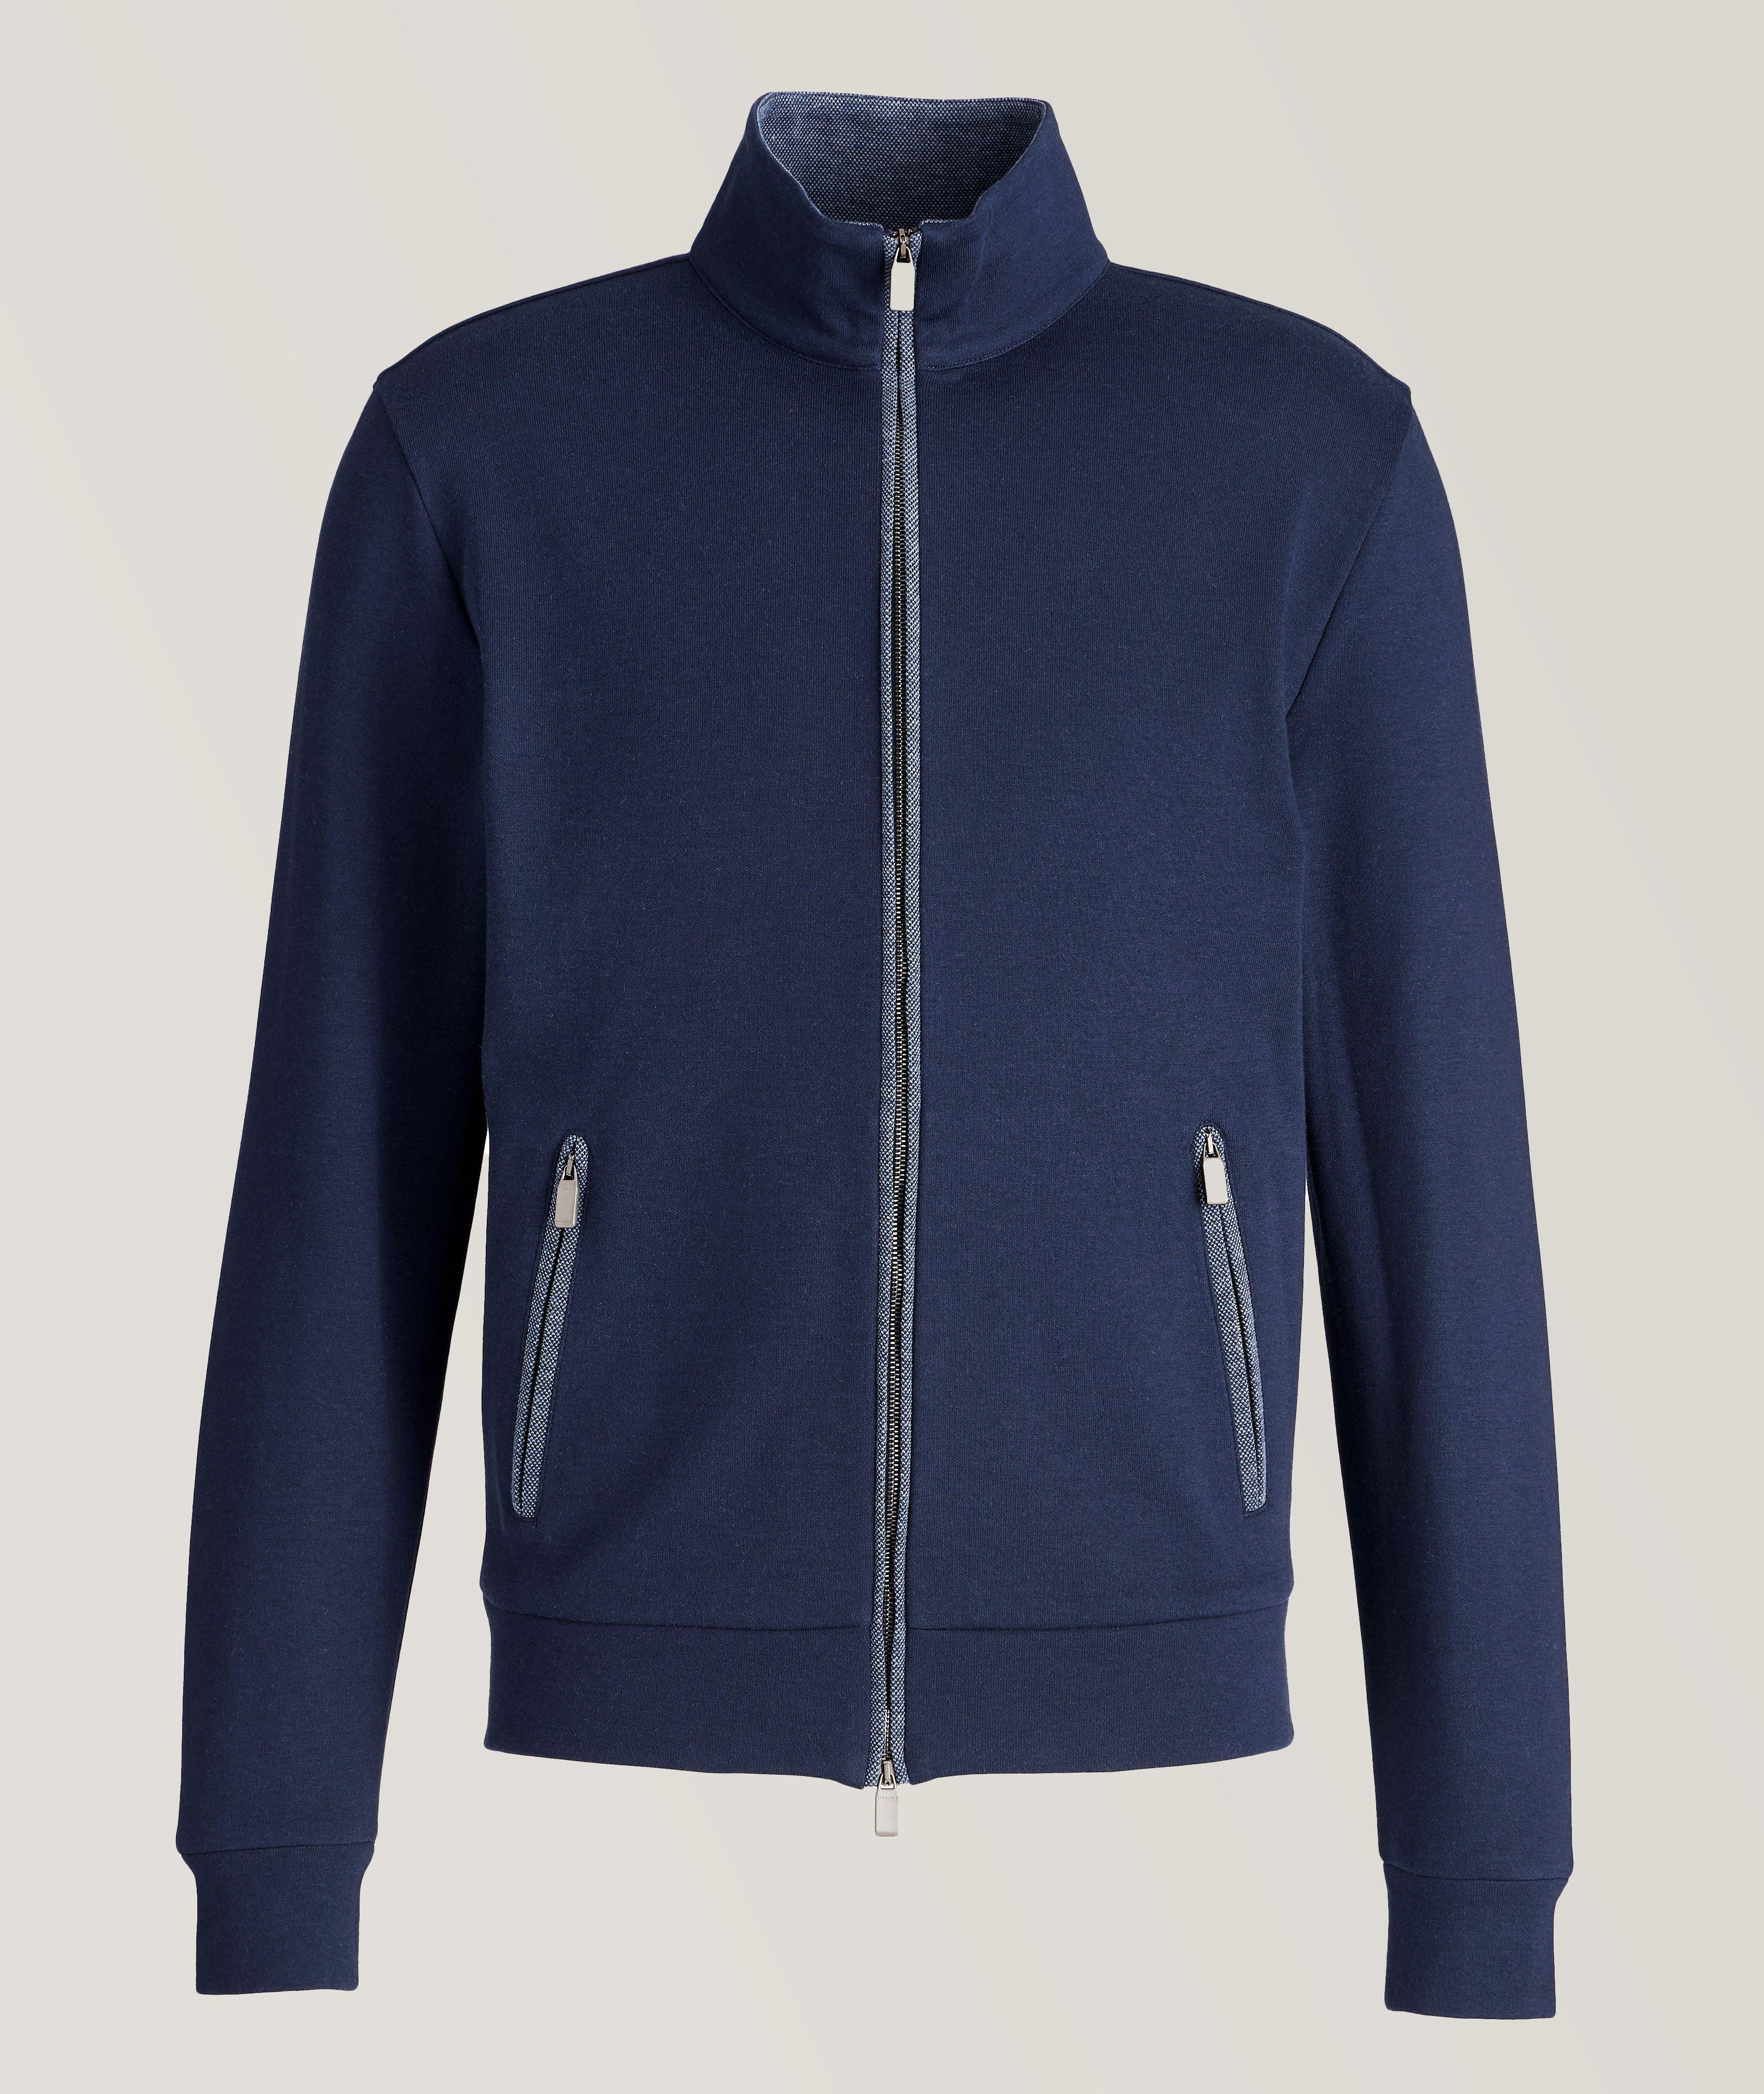 Cotton-Blend Zip-Up Sweater image 0